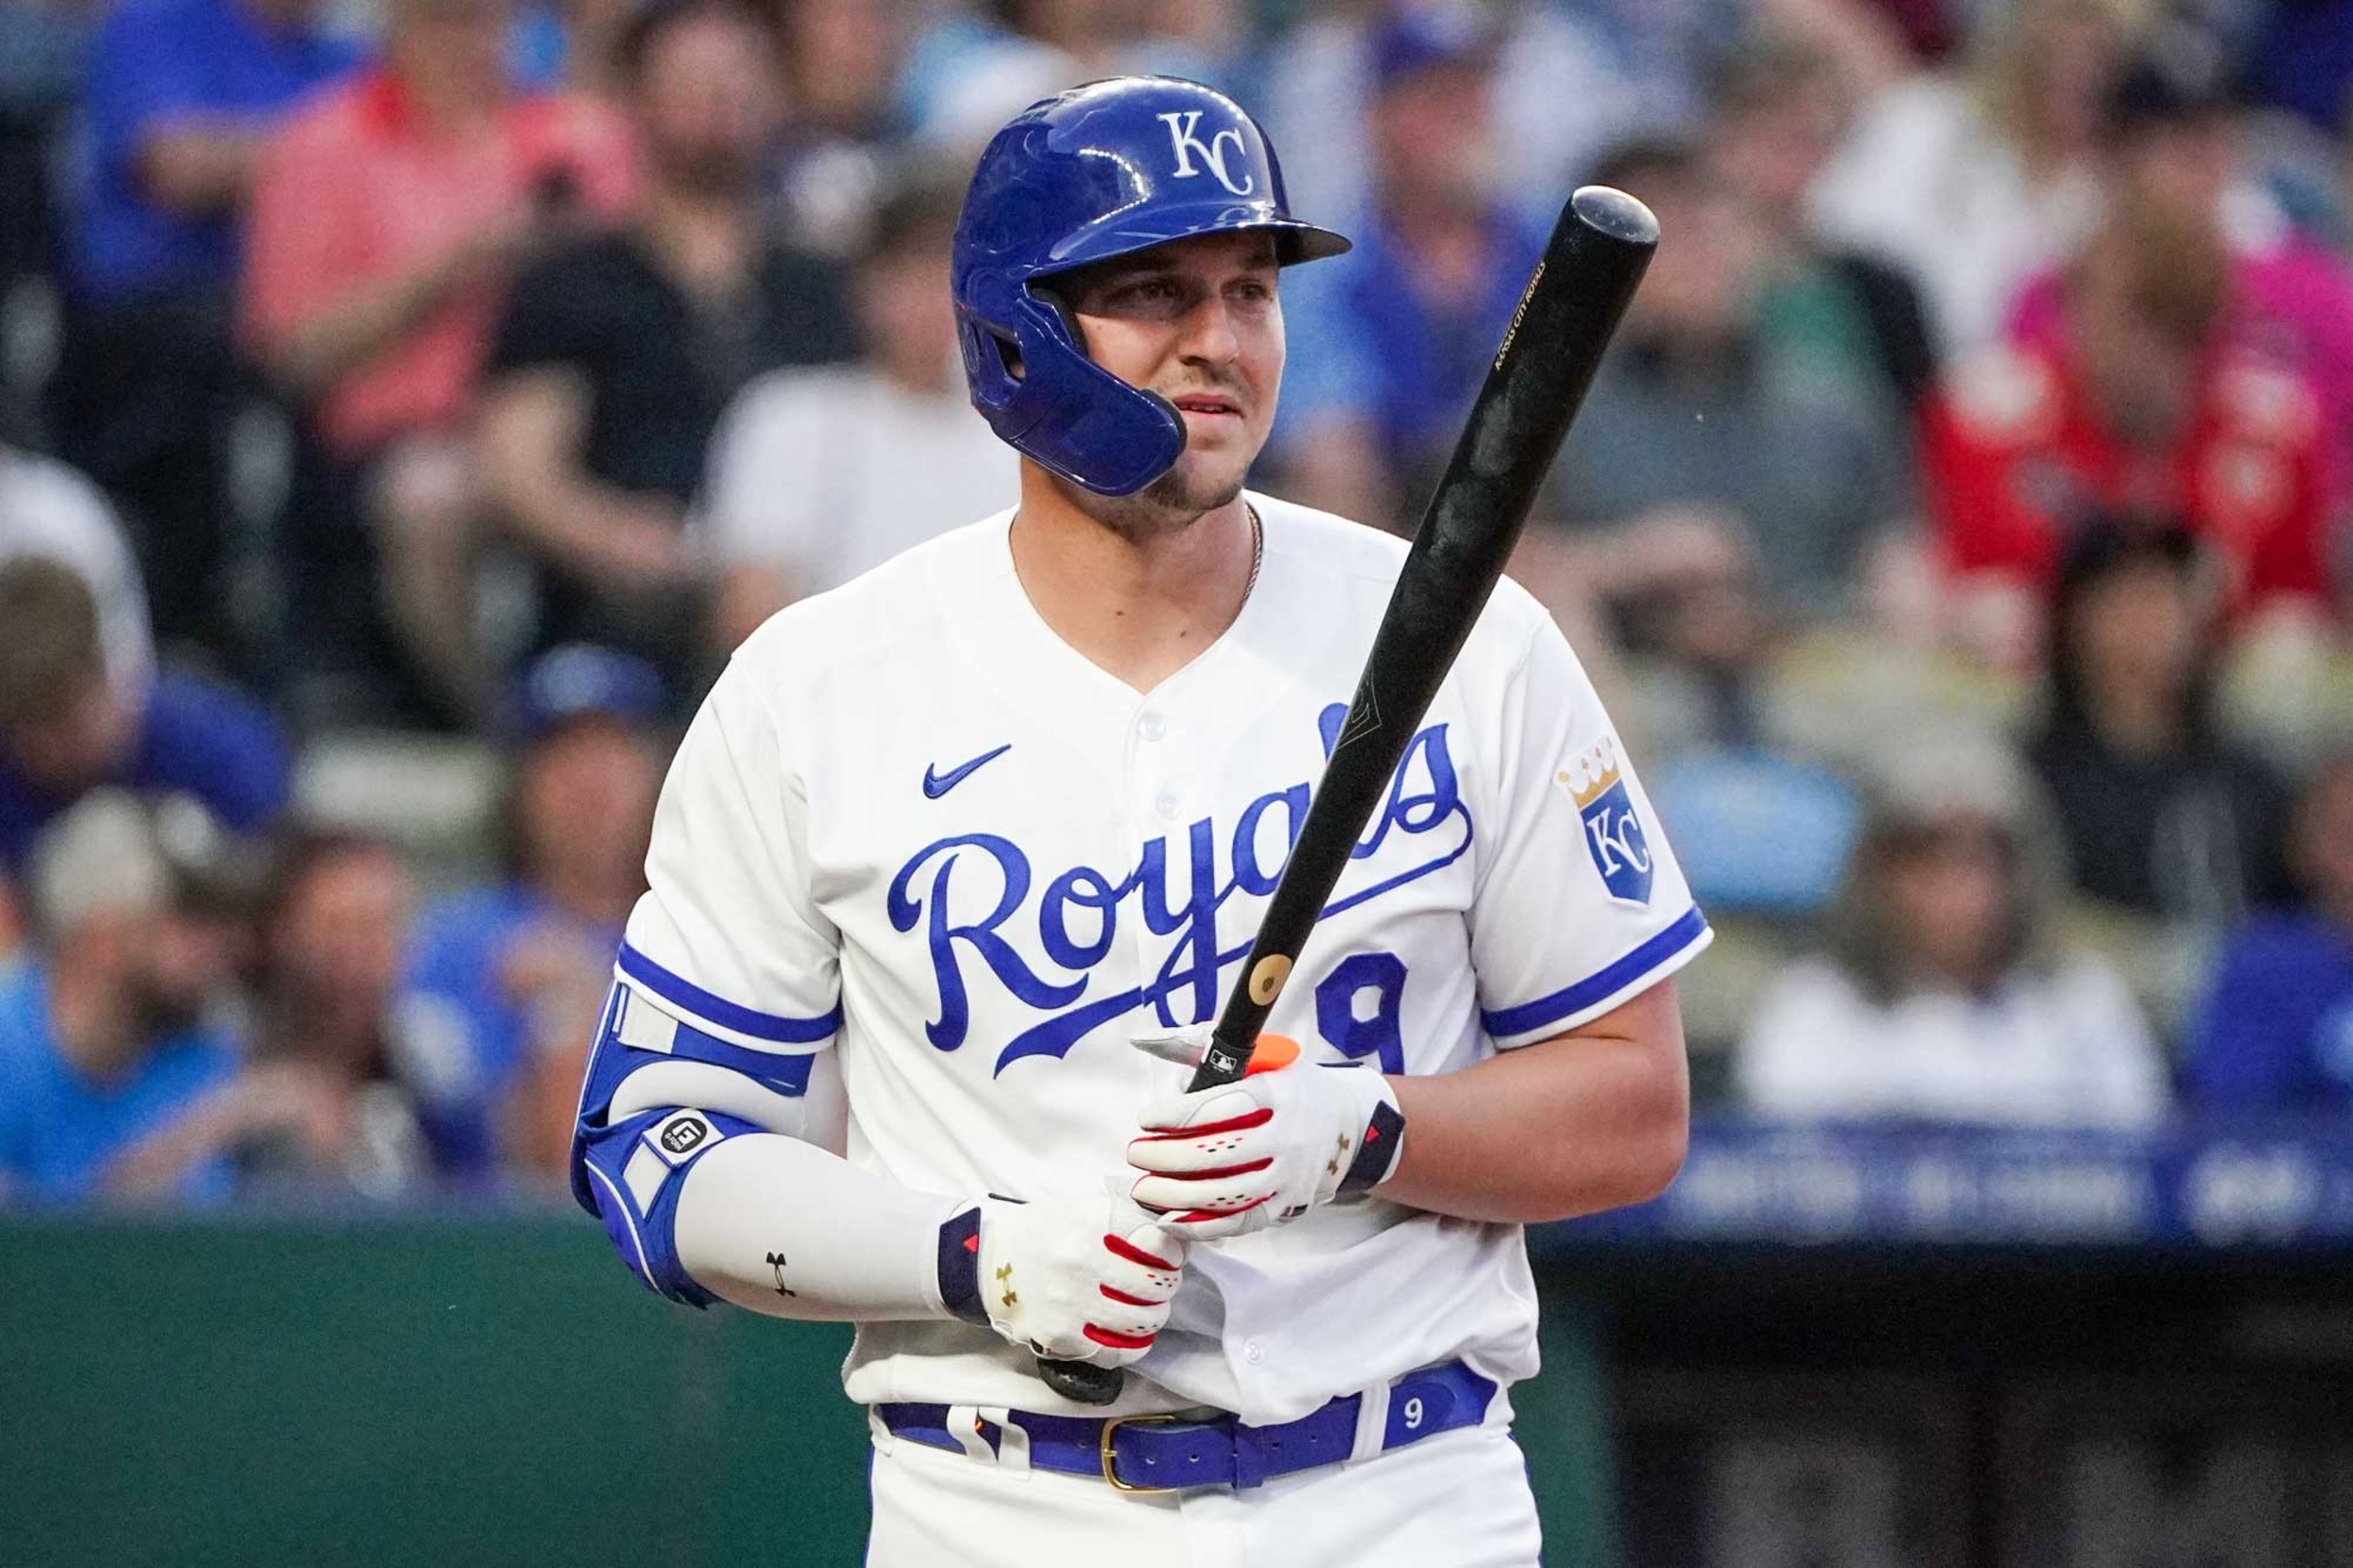 <p>KC's lineup was in rough shape last season after losing Pasquantino to a season-ending shoulder injury. They've added reinforcements like Hunter Renfroe, but it will be on Pasquantino to be a difference-maker. He's shown the ability with outstanding plate discipline and a .799 OPS in 133 games over the last two seasons.</p><p><a href='https://www.msn.com/en-us/community/channel/vid-cj9pqbr0vn9in2b6ddcd8sfgpfq6x6utp44fssrv6mc2gtybw0us'>Follow us on MSN to see more of our exclusive MLB content.</a></p>